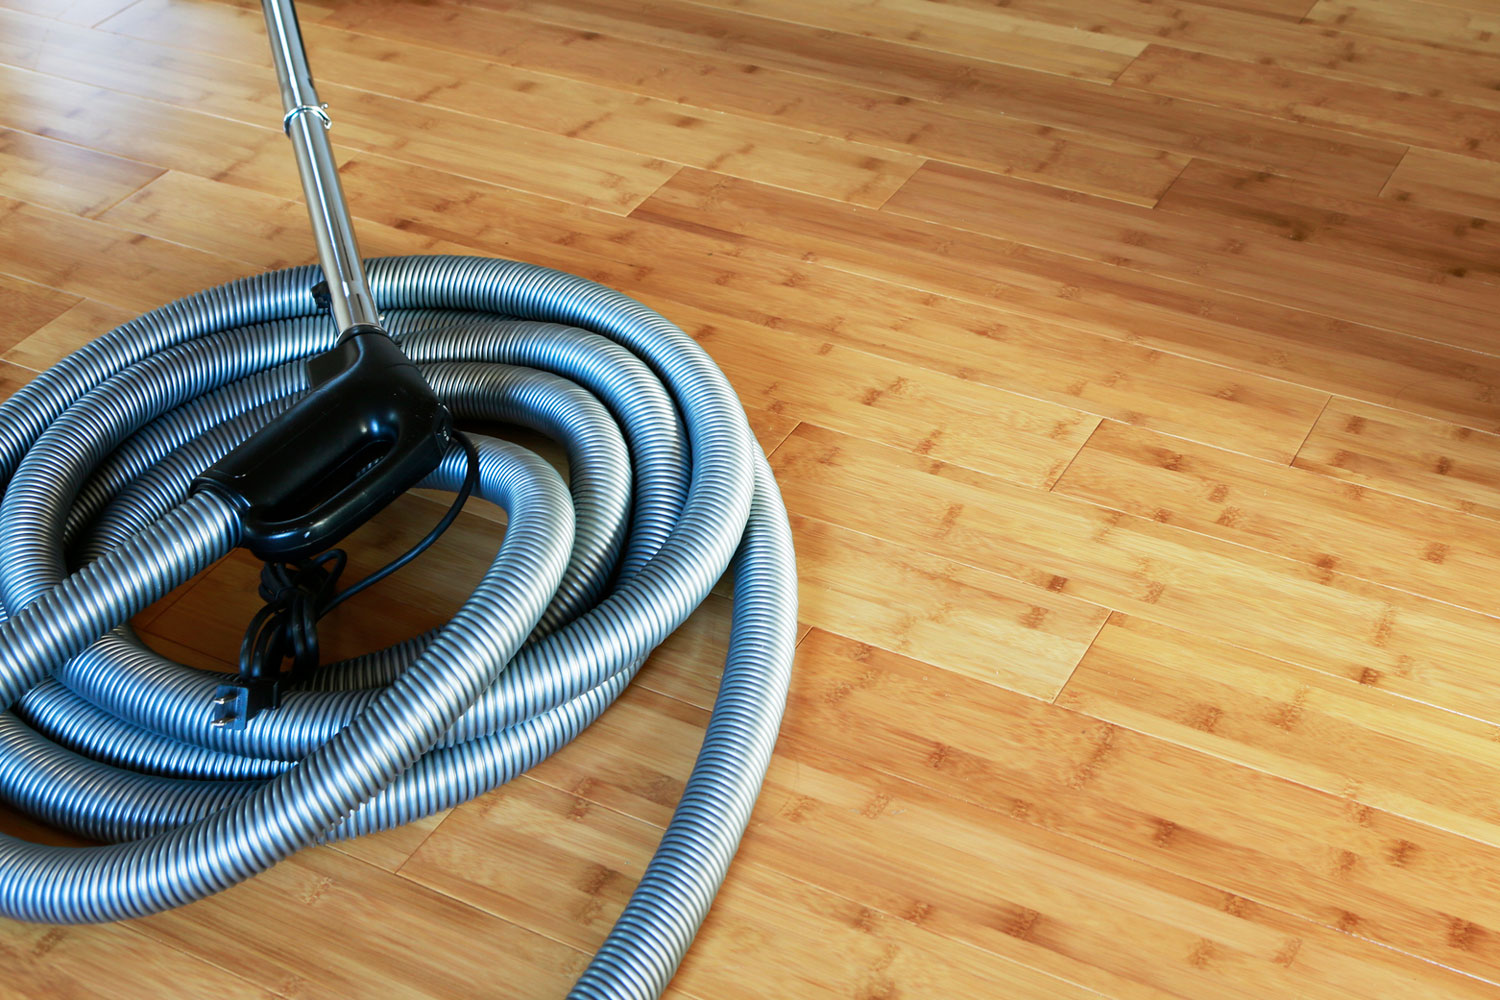 Beautiful bamboo hardwood floor with a central vacuum cleaner, Can A Central Vacuum Hose Be Repaired?